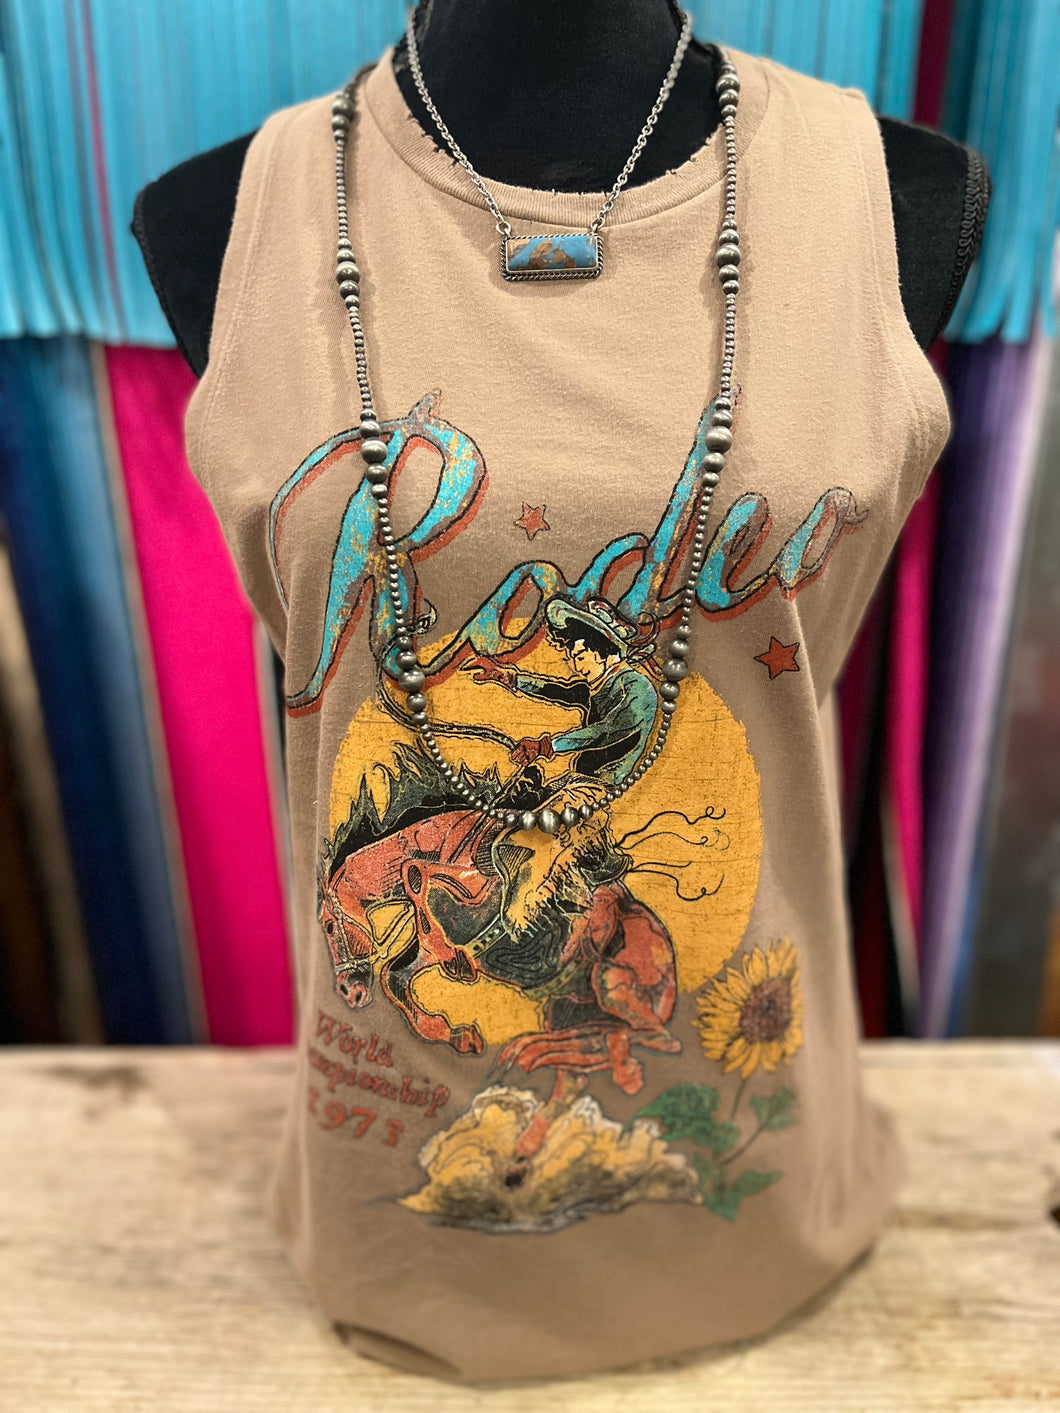 Rodeo Graphic Tank